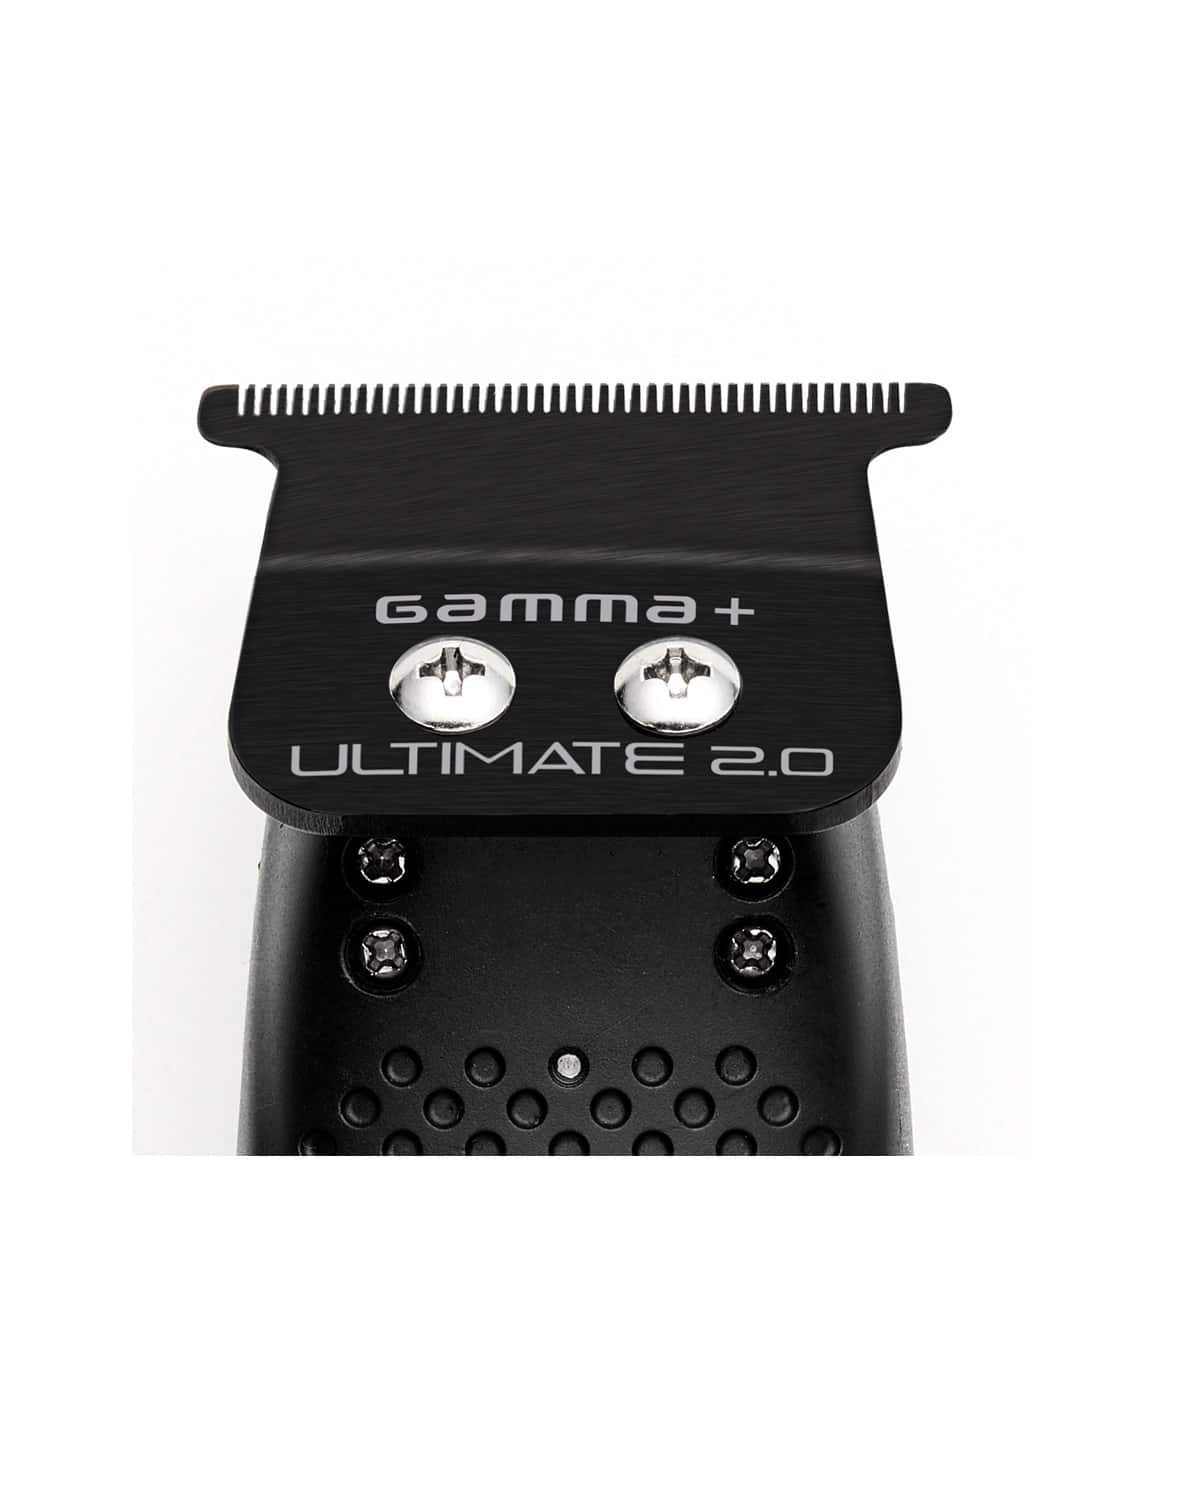 Gamma X-Evo Linear Trimmer - ProCare Outlet by Gamma+